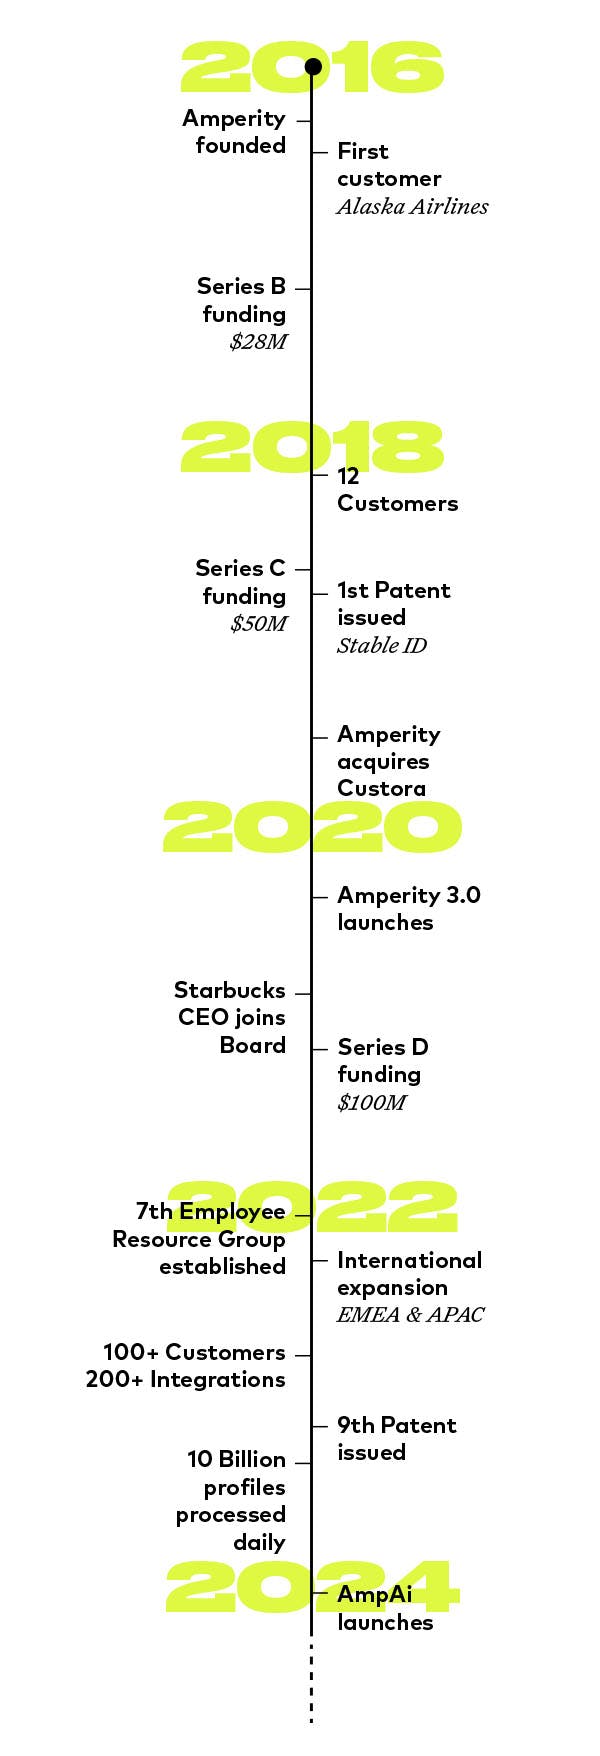 A vertical timeline of Amperity's important company milestones